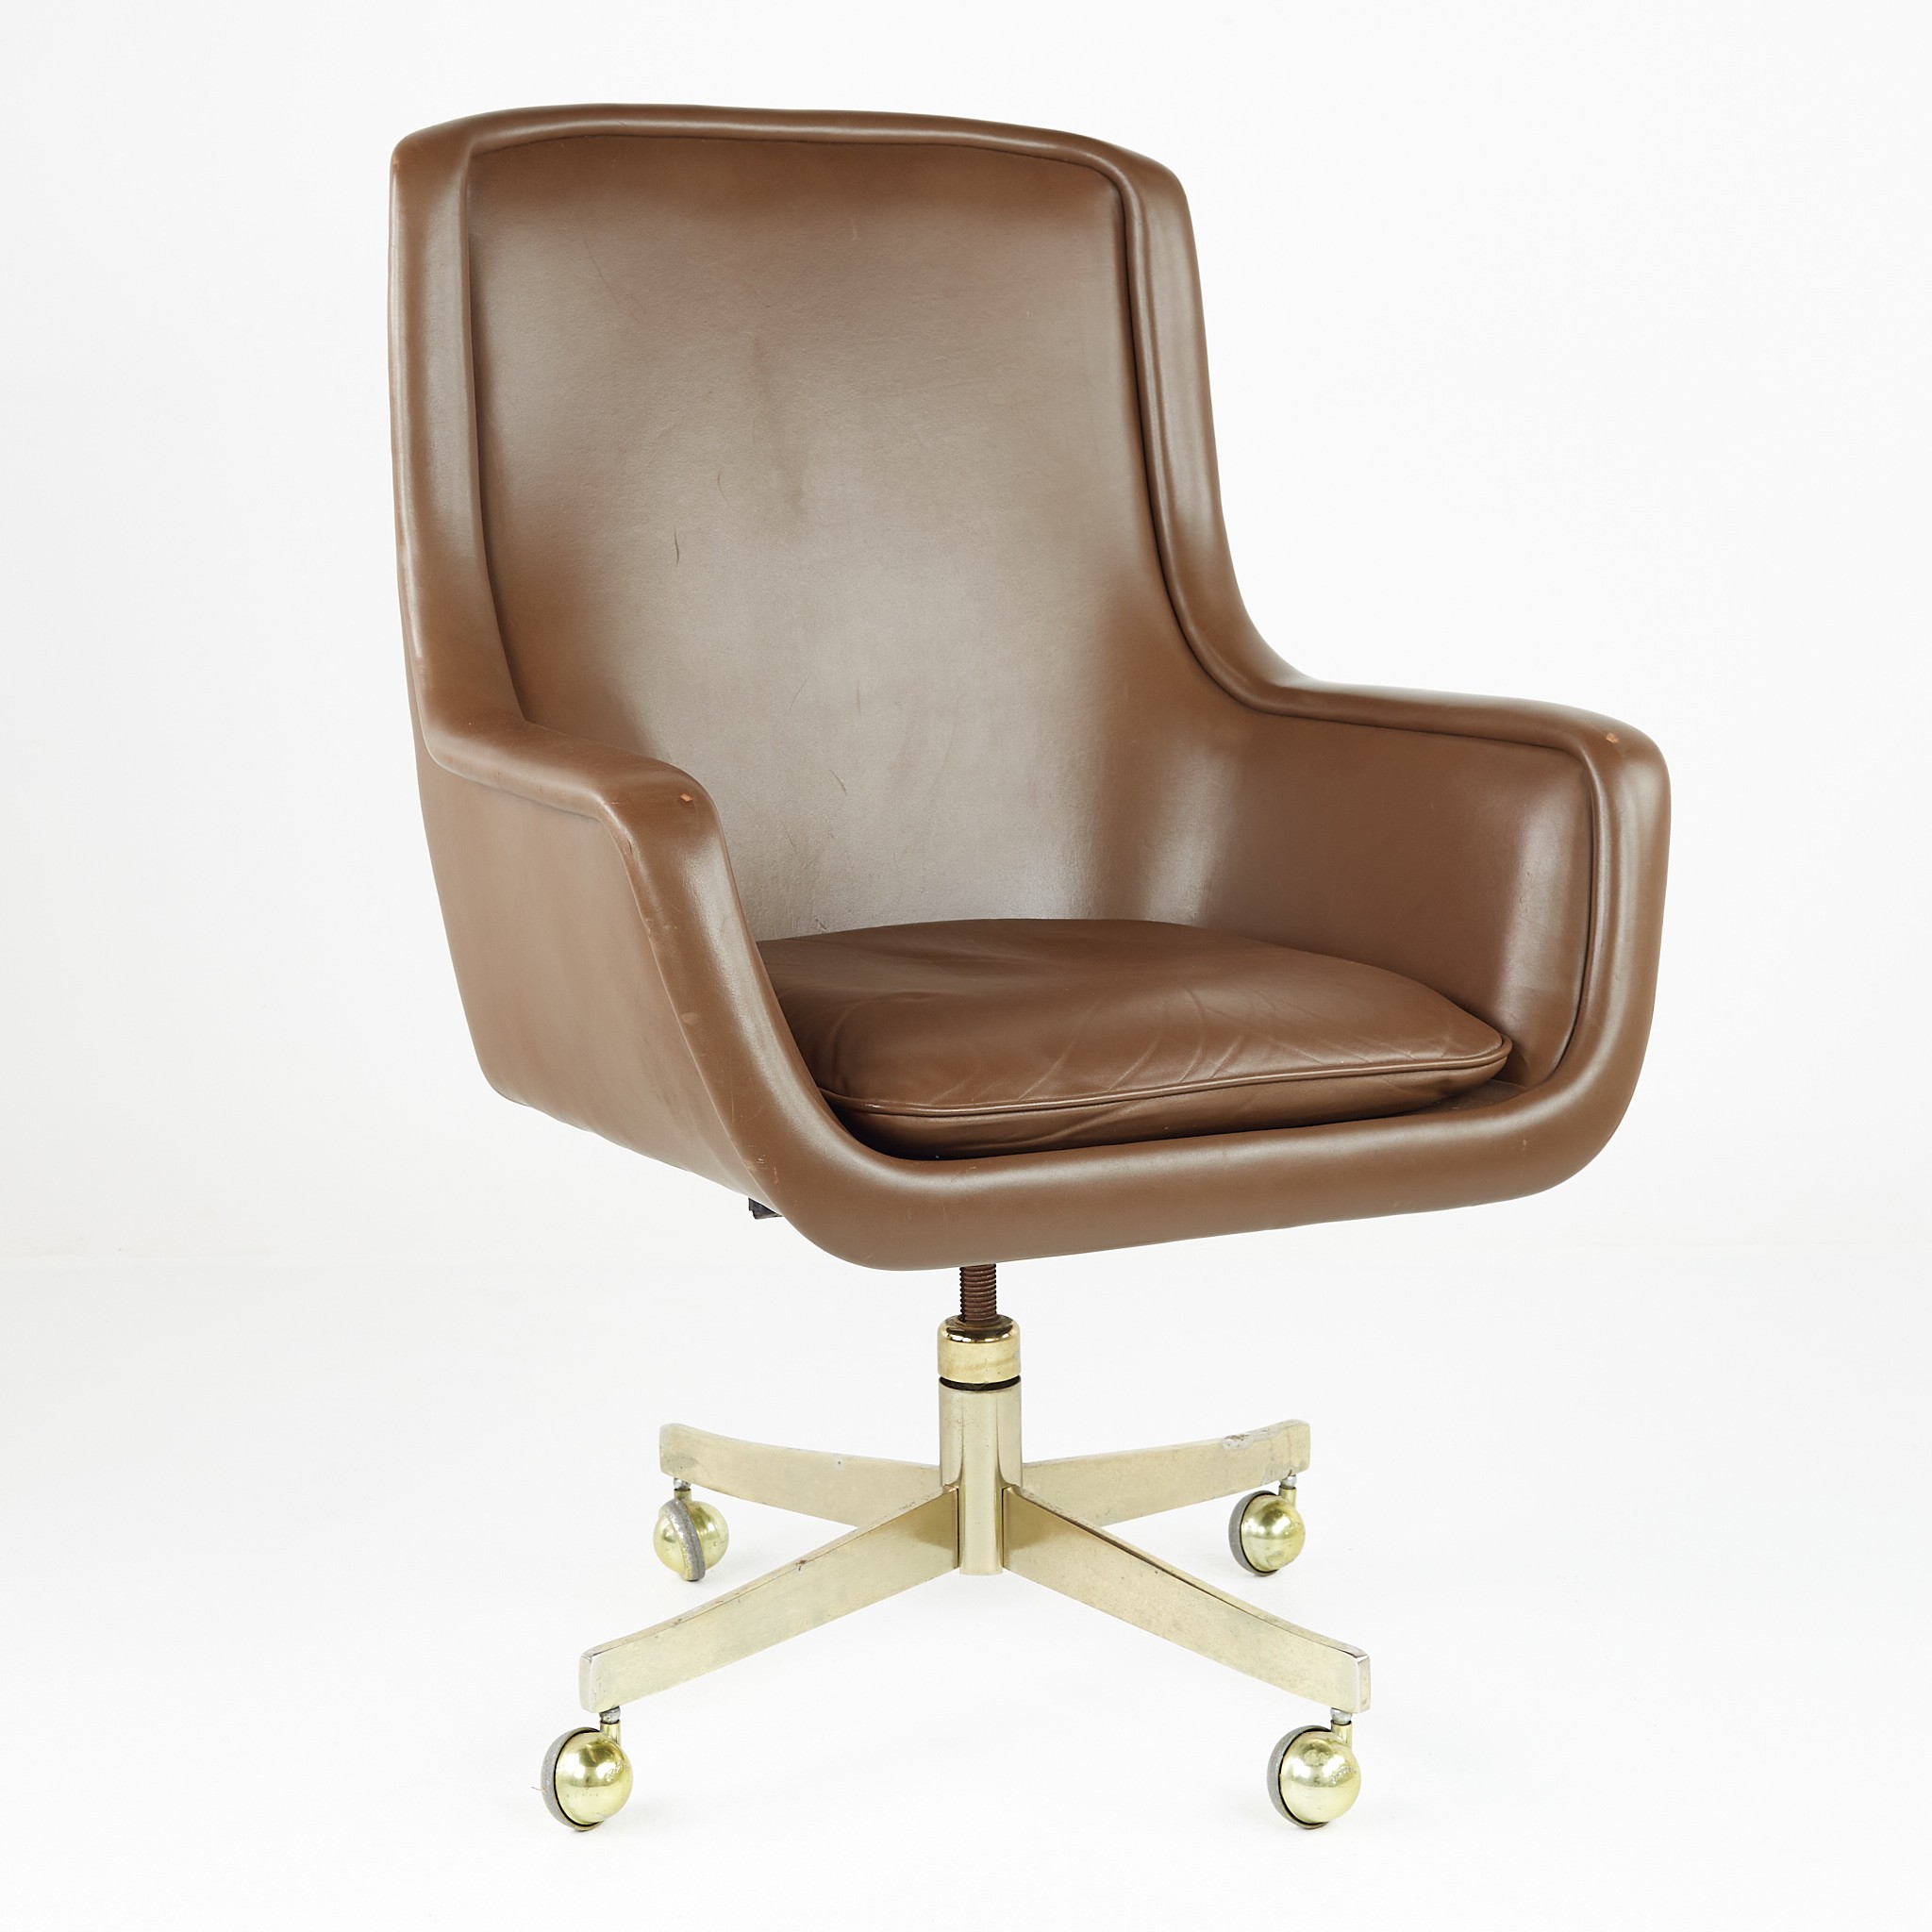 Copy of Ward Bennett Mid Century Executive Highback Brass and Leather Office Chairs - Set of 4